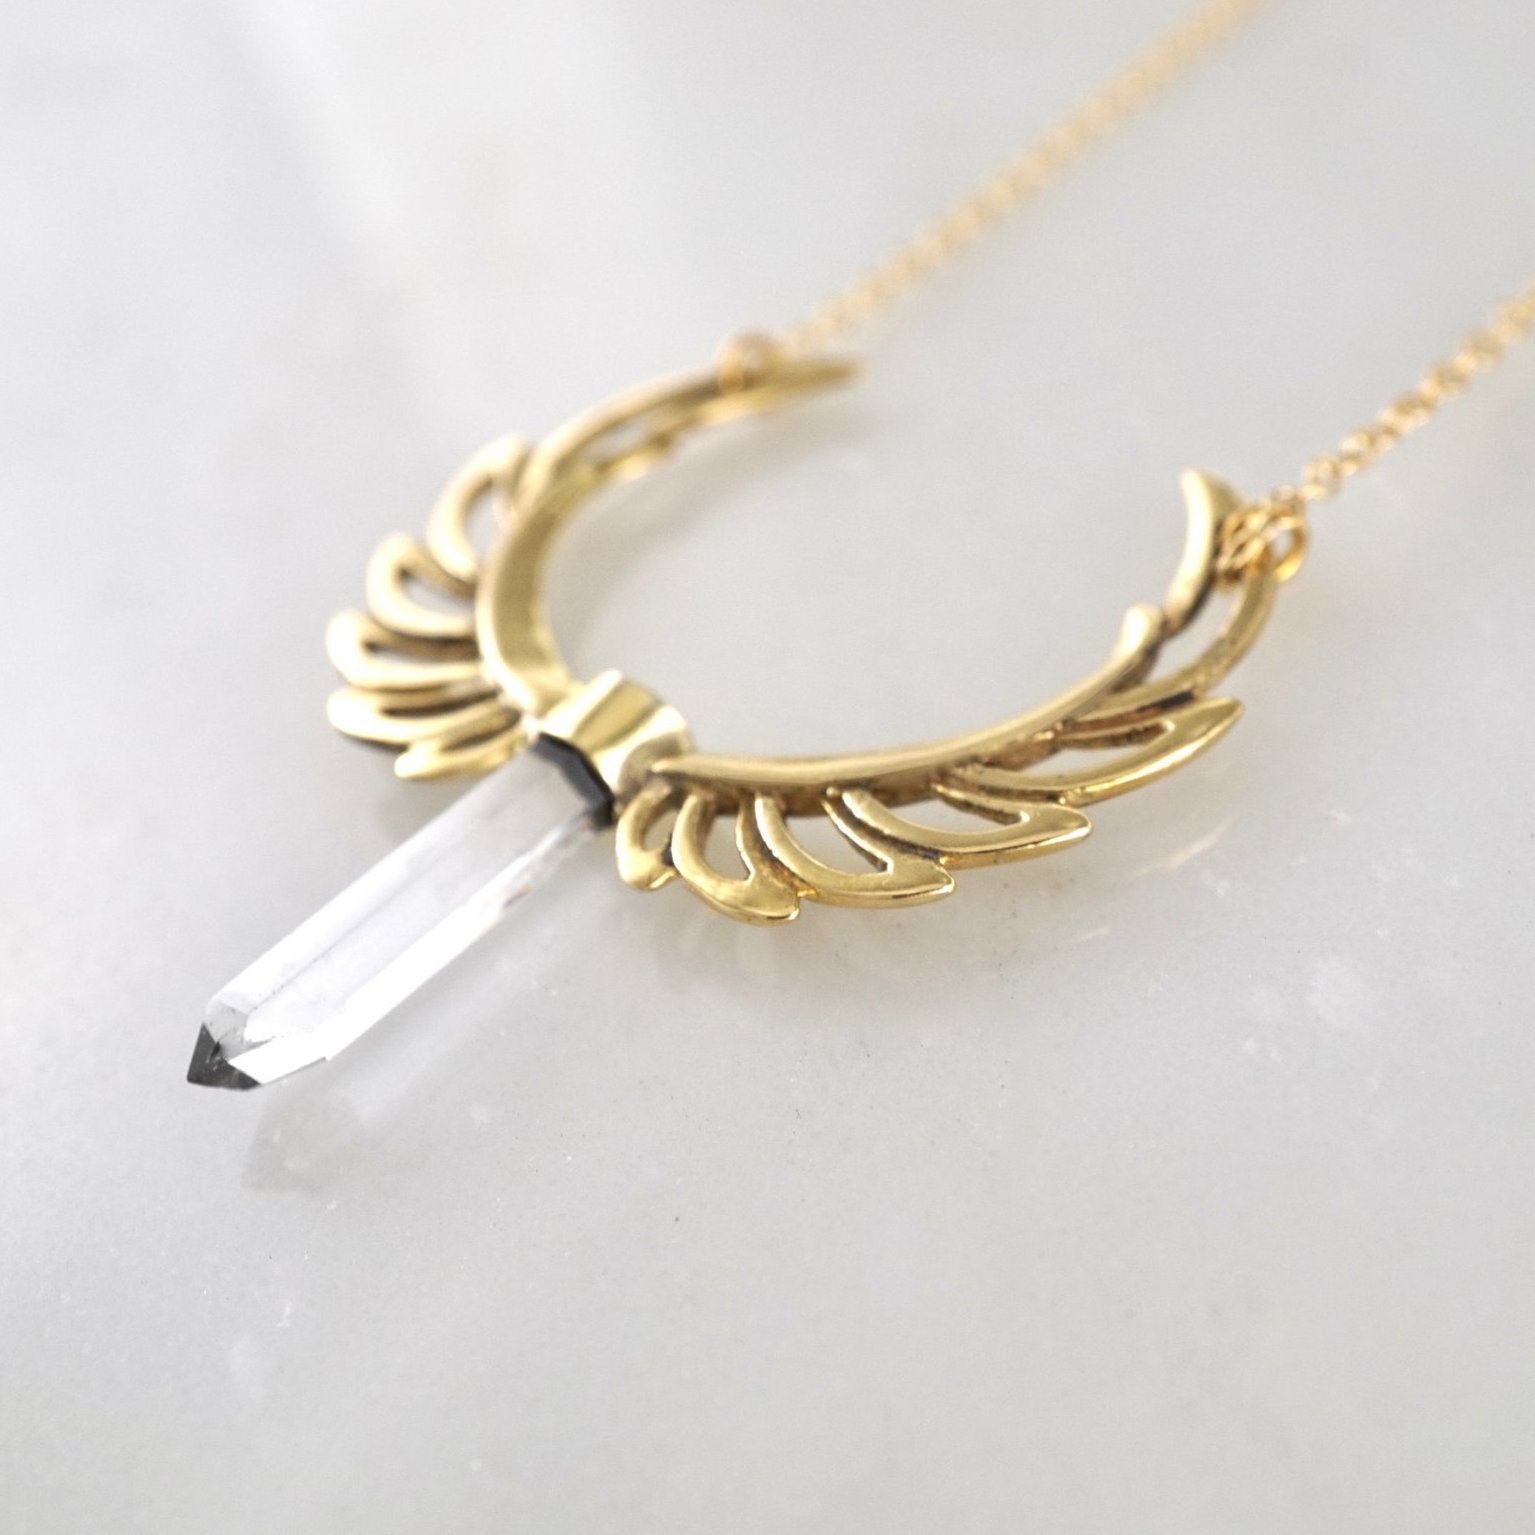 Phoenix Feather Necklace with 14K Gold Filled Chain and Clear Quartz Crystal- Statement Necklace - Goddess  Inspirational Jewelry (B138)